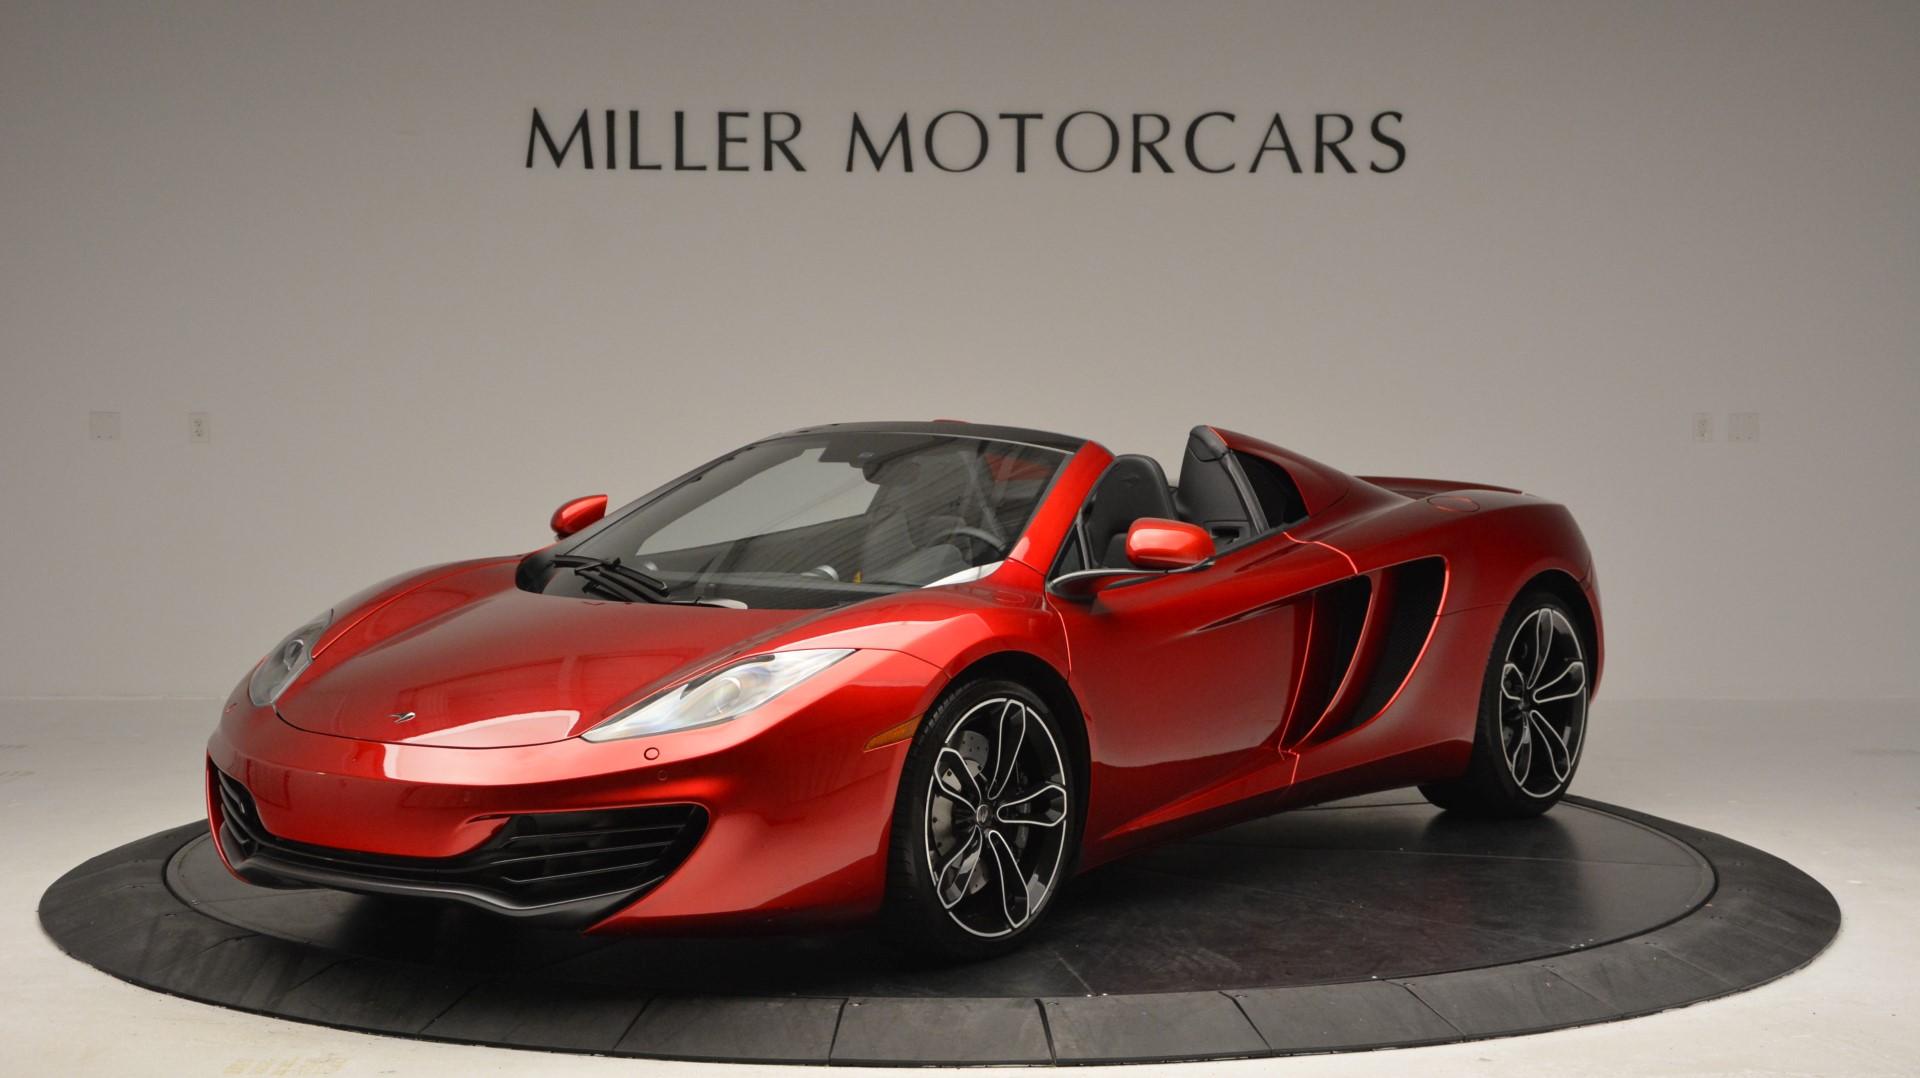 Used 2013 McLaren 12C Spider for sale Sold at Bentley Greenwich in Greenwich CT 06830 1